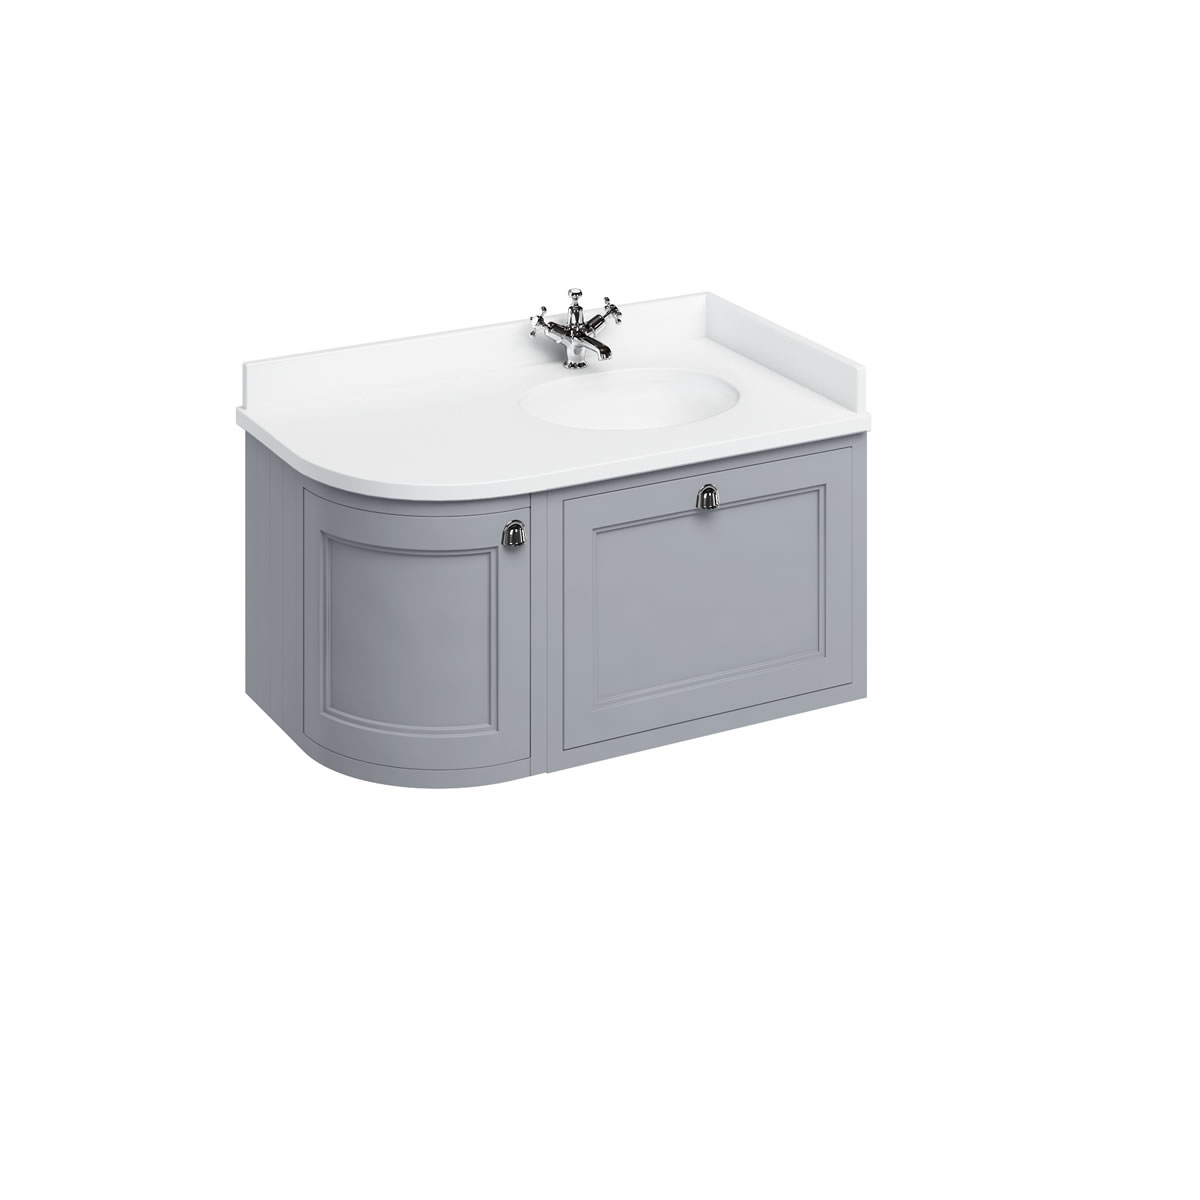 Wall Hung 100 Curved Corner Vanity Unit Right Hand - Classic Grey and Minerva white worktop with integrated white basin